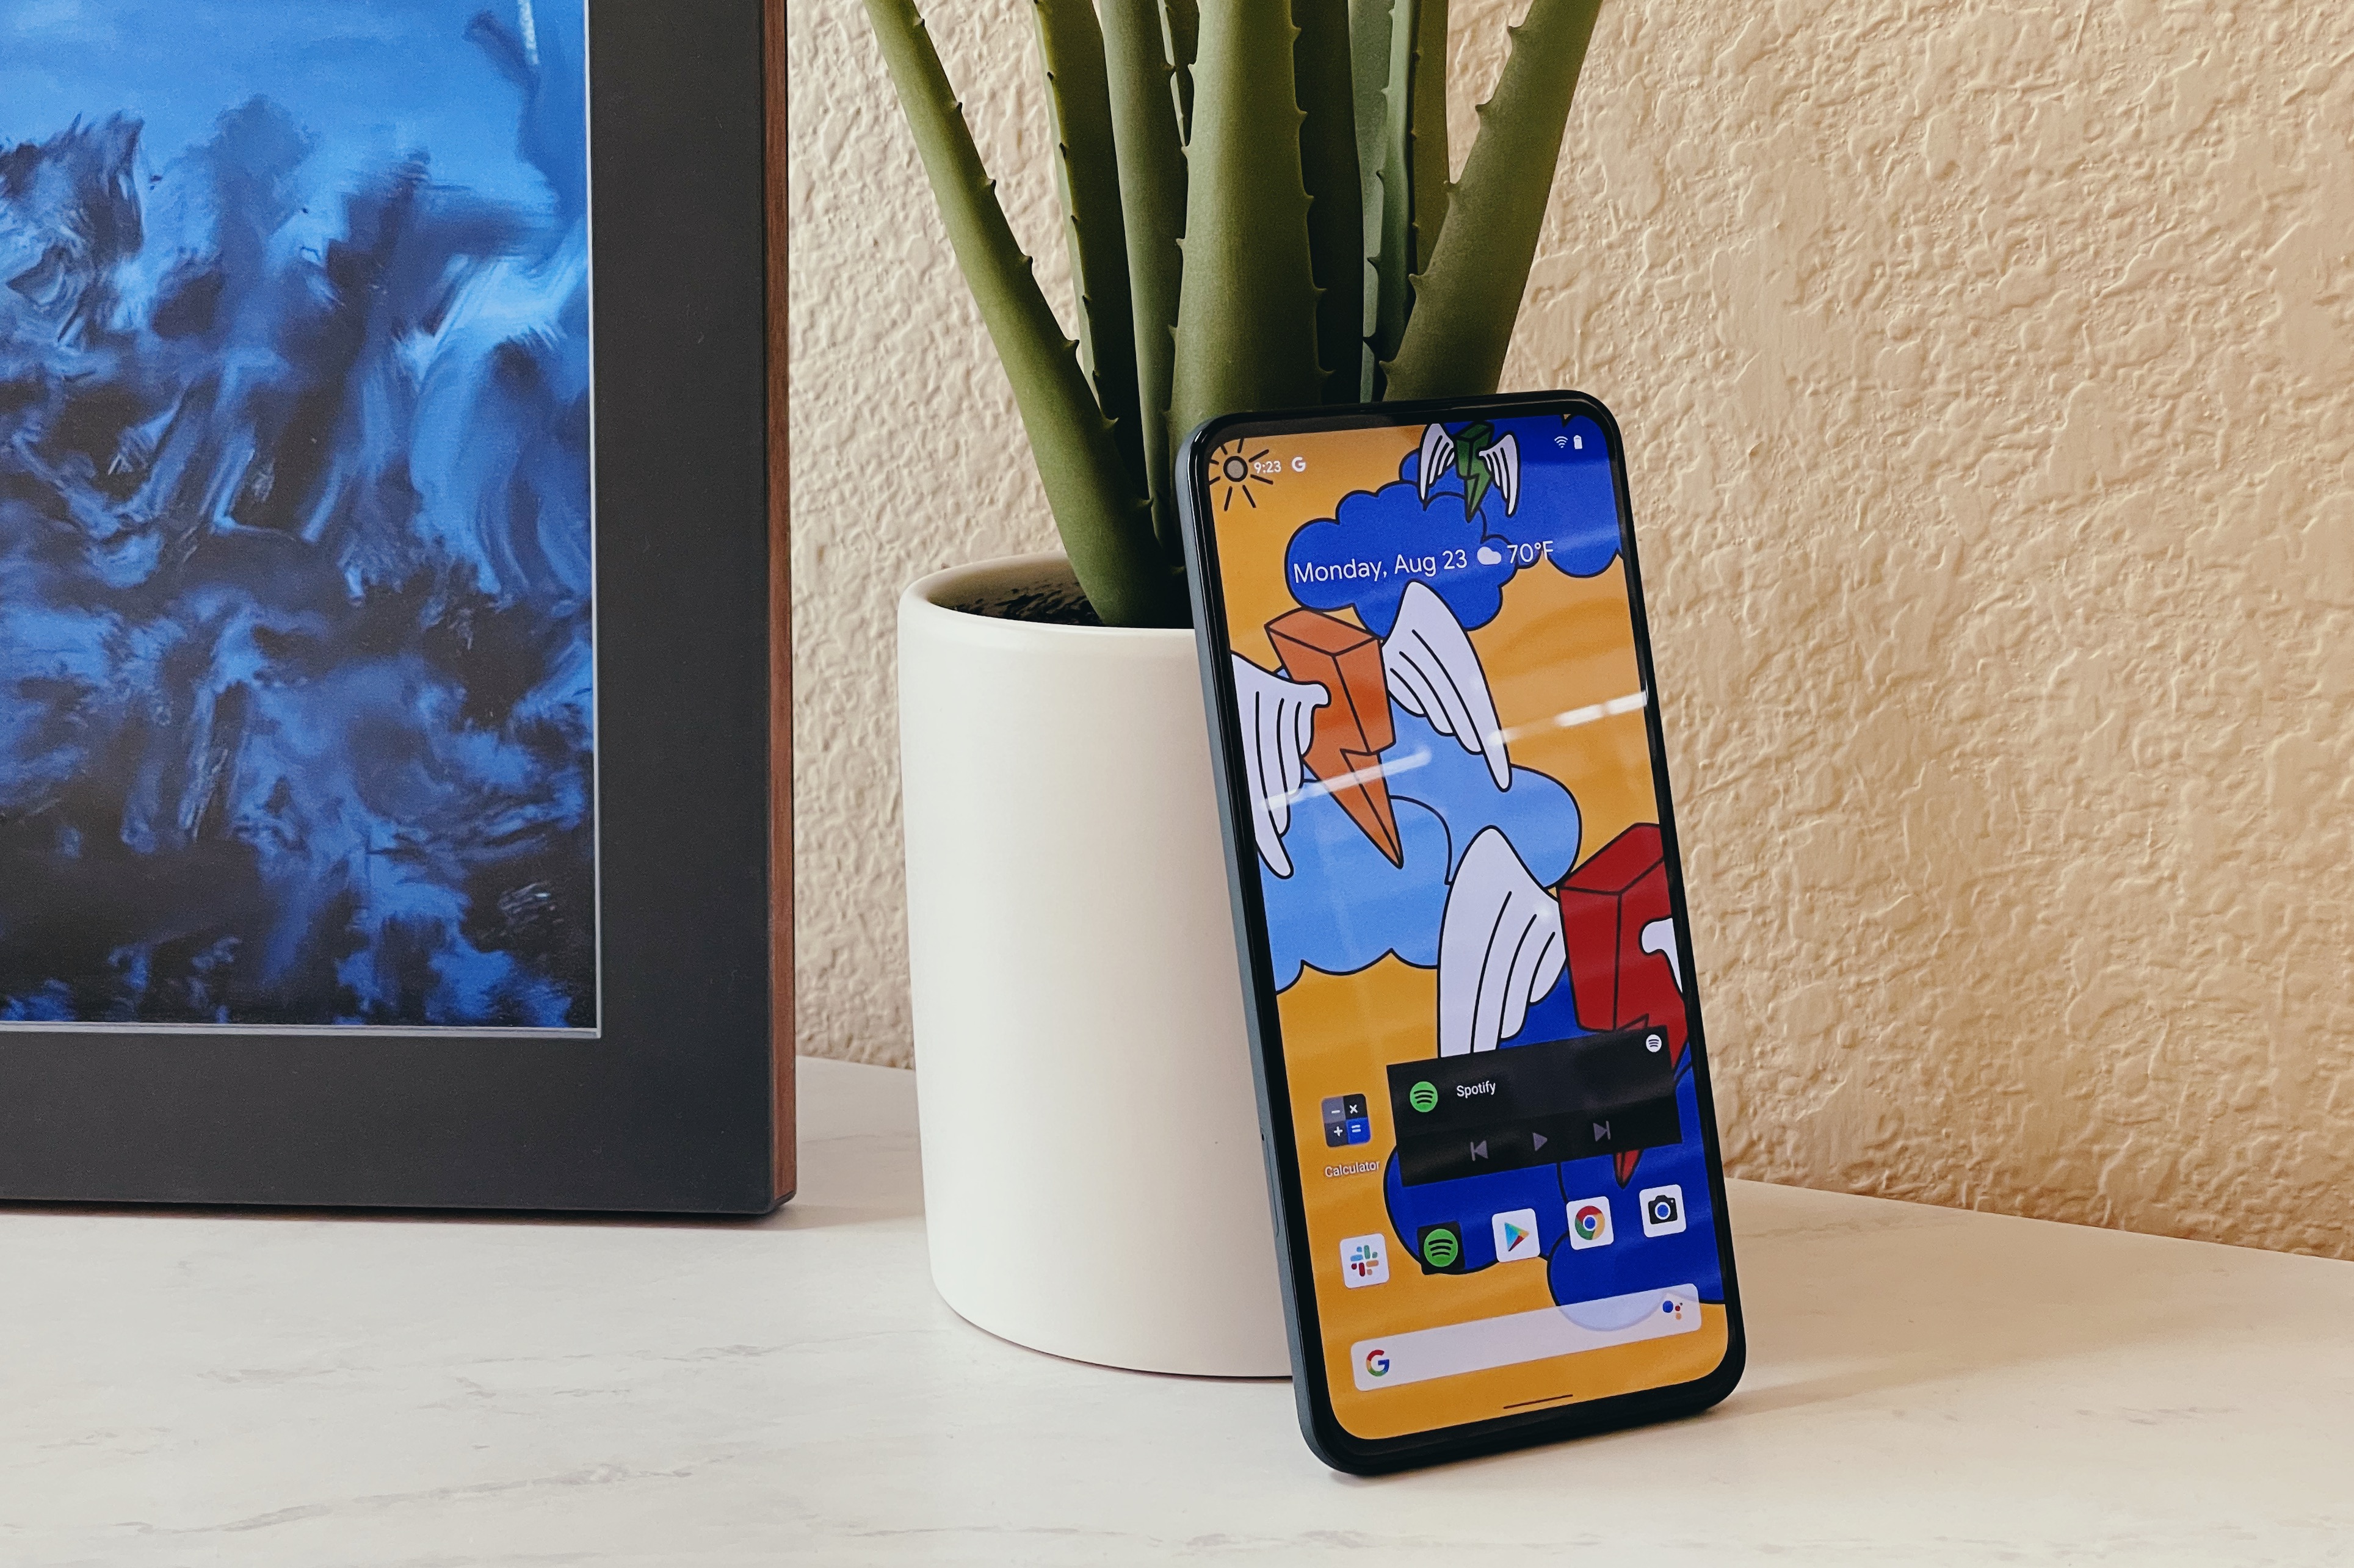 Google Pixel 5a With 5G Review: A 5G Phone for the Masses